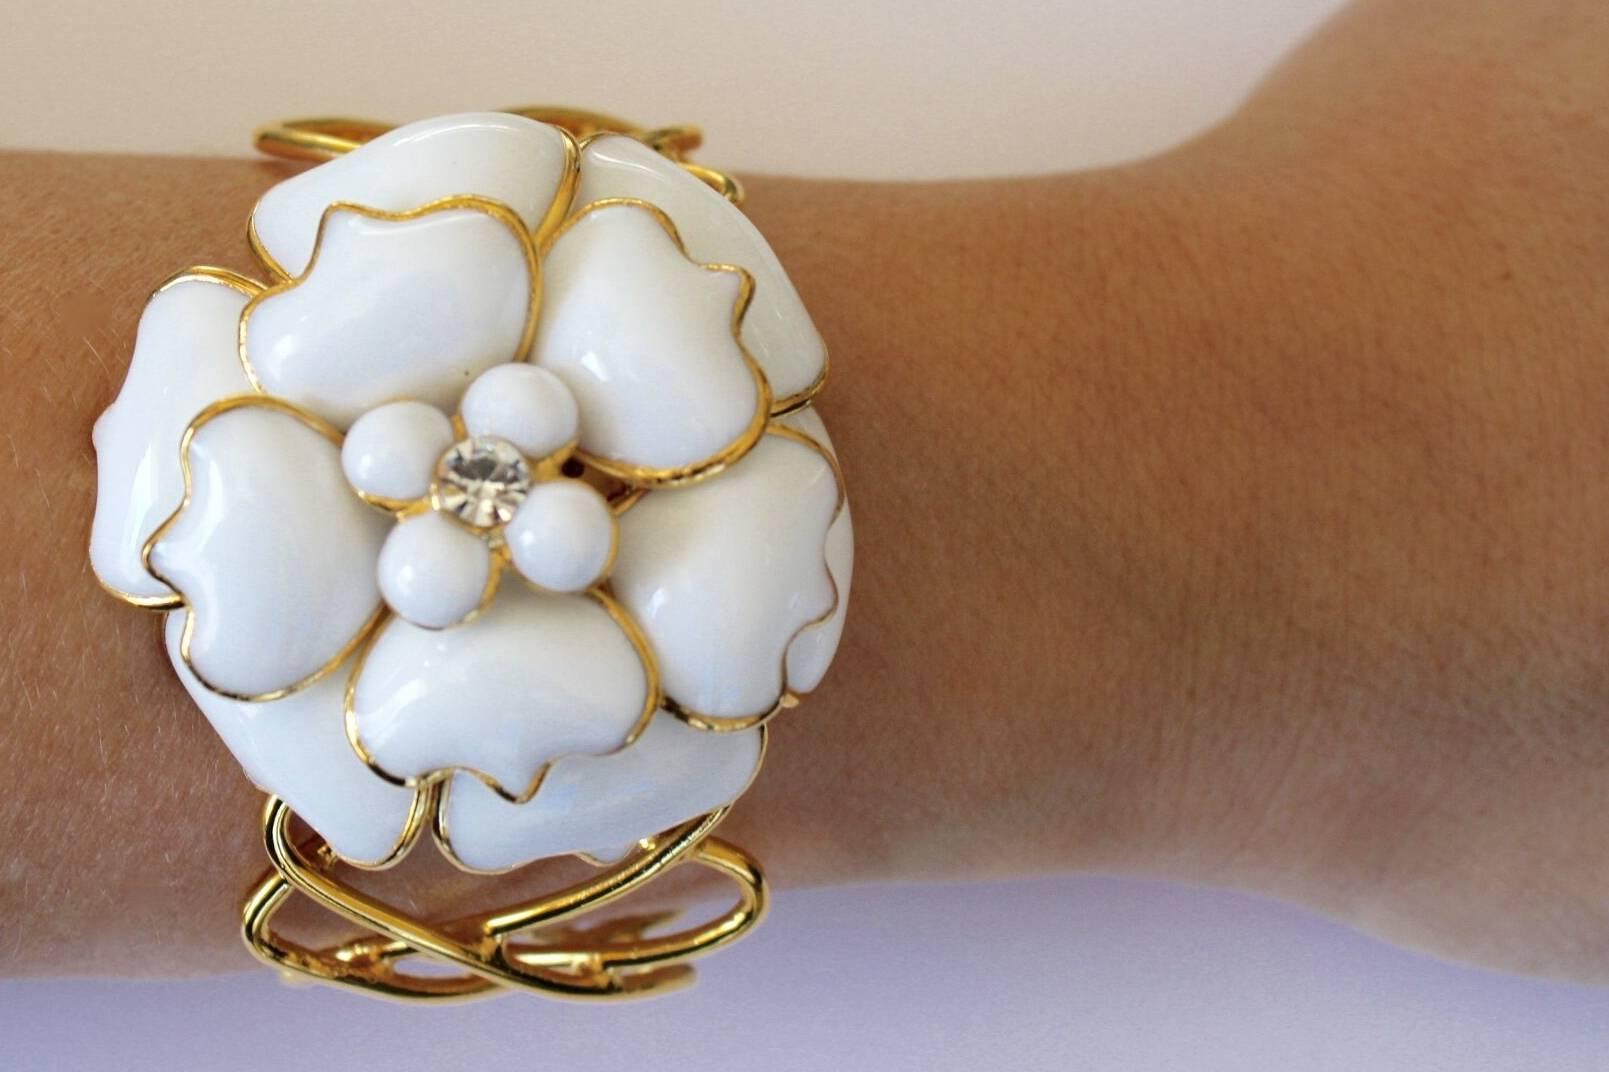 Pate de verre glass camellia with crystal center bracelet. Cuff portion of bracelet is made with gold plated brass wire in a crisscross pattern. Cuff is soft and can be sized for both small and large wrists. A modern take on a class chic style.